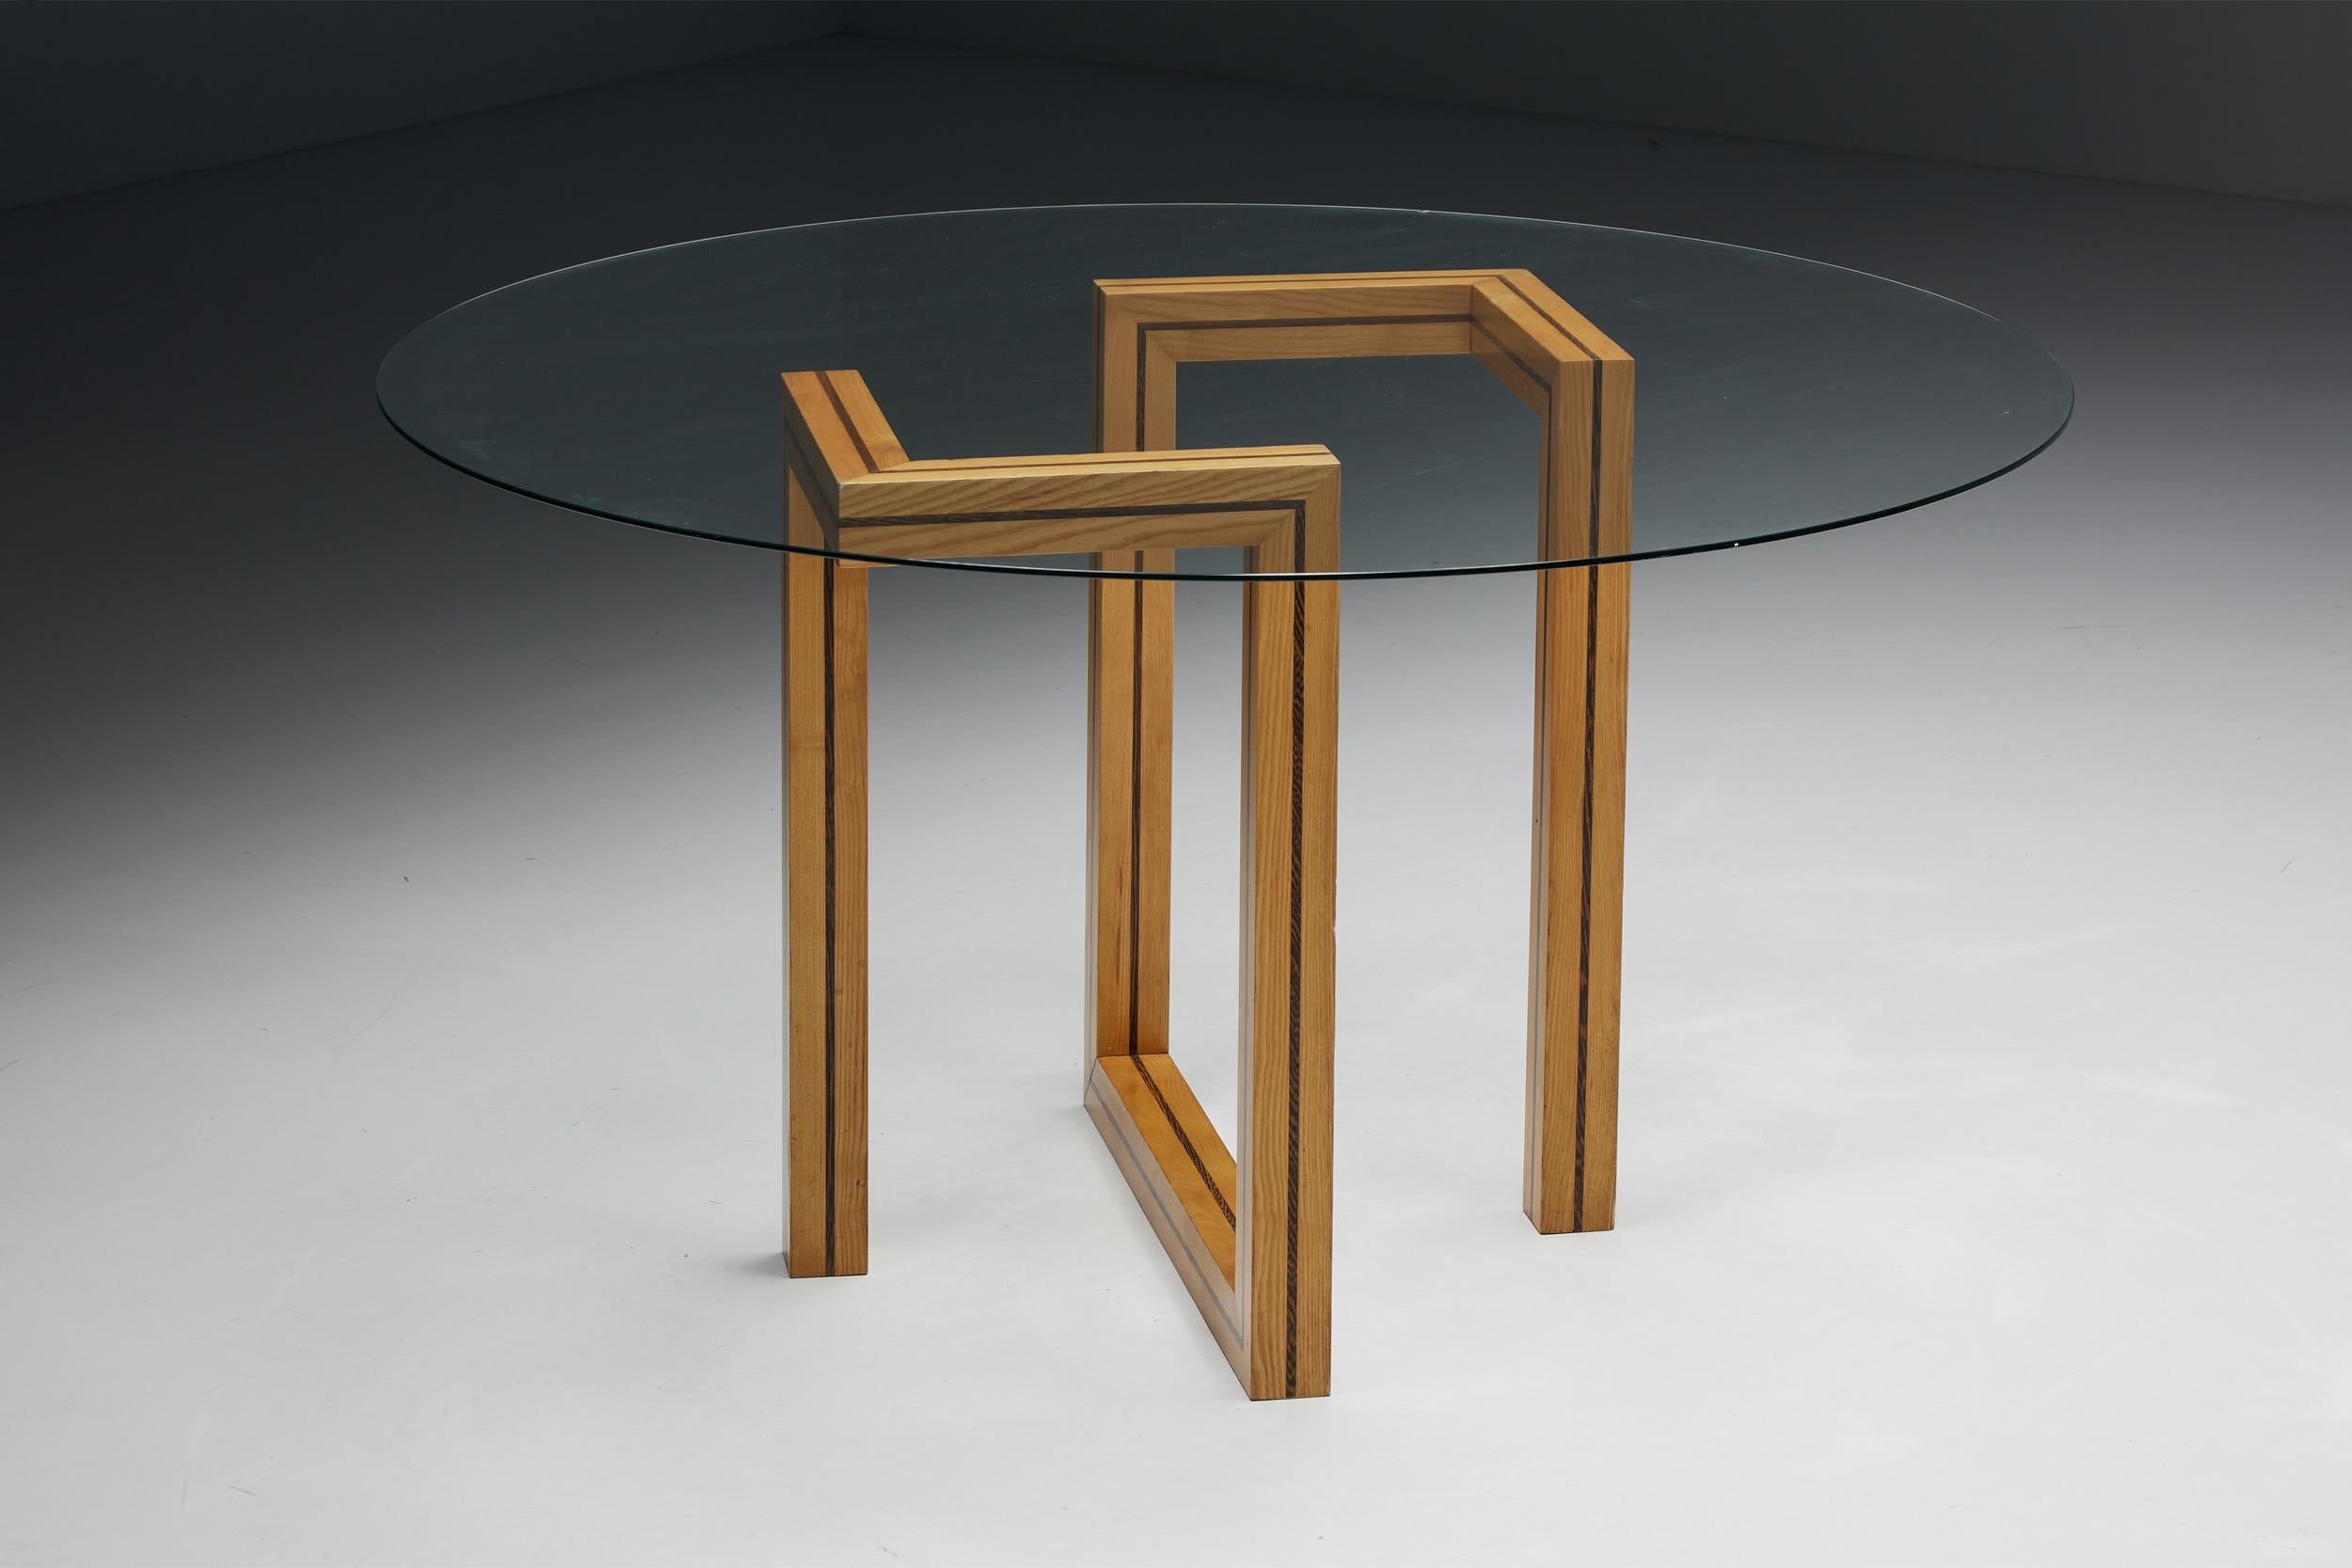 Postmodern; round; glass; dining table; geometric base; wood; working desk; architectural; post-modern; 

The legs of this postmodern dining table are based on a well-thought-out wooden structure. This wooden frame holds the round glass tabletop